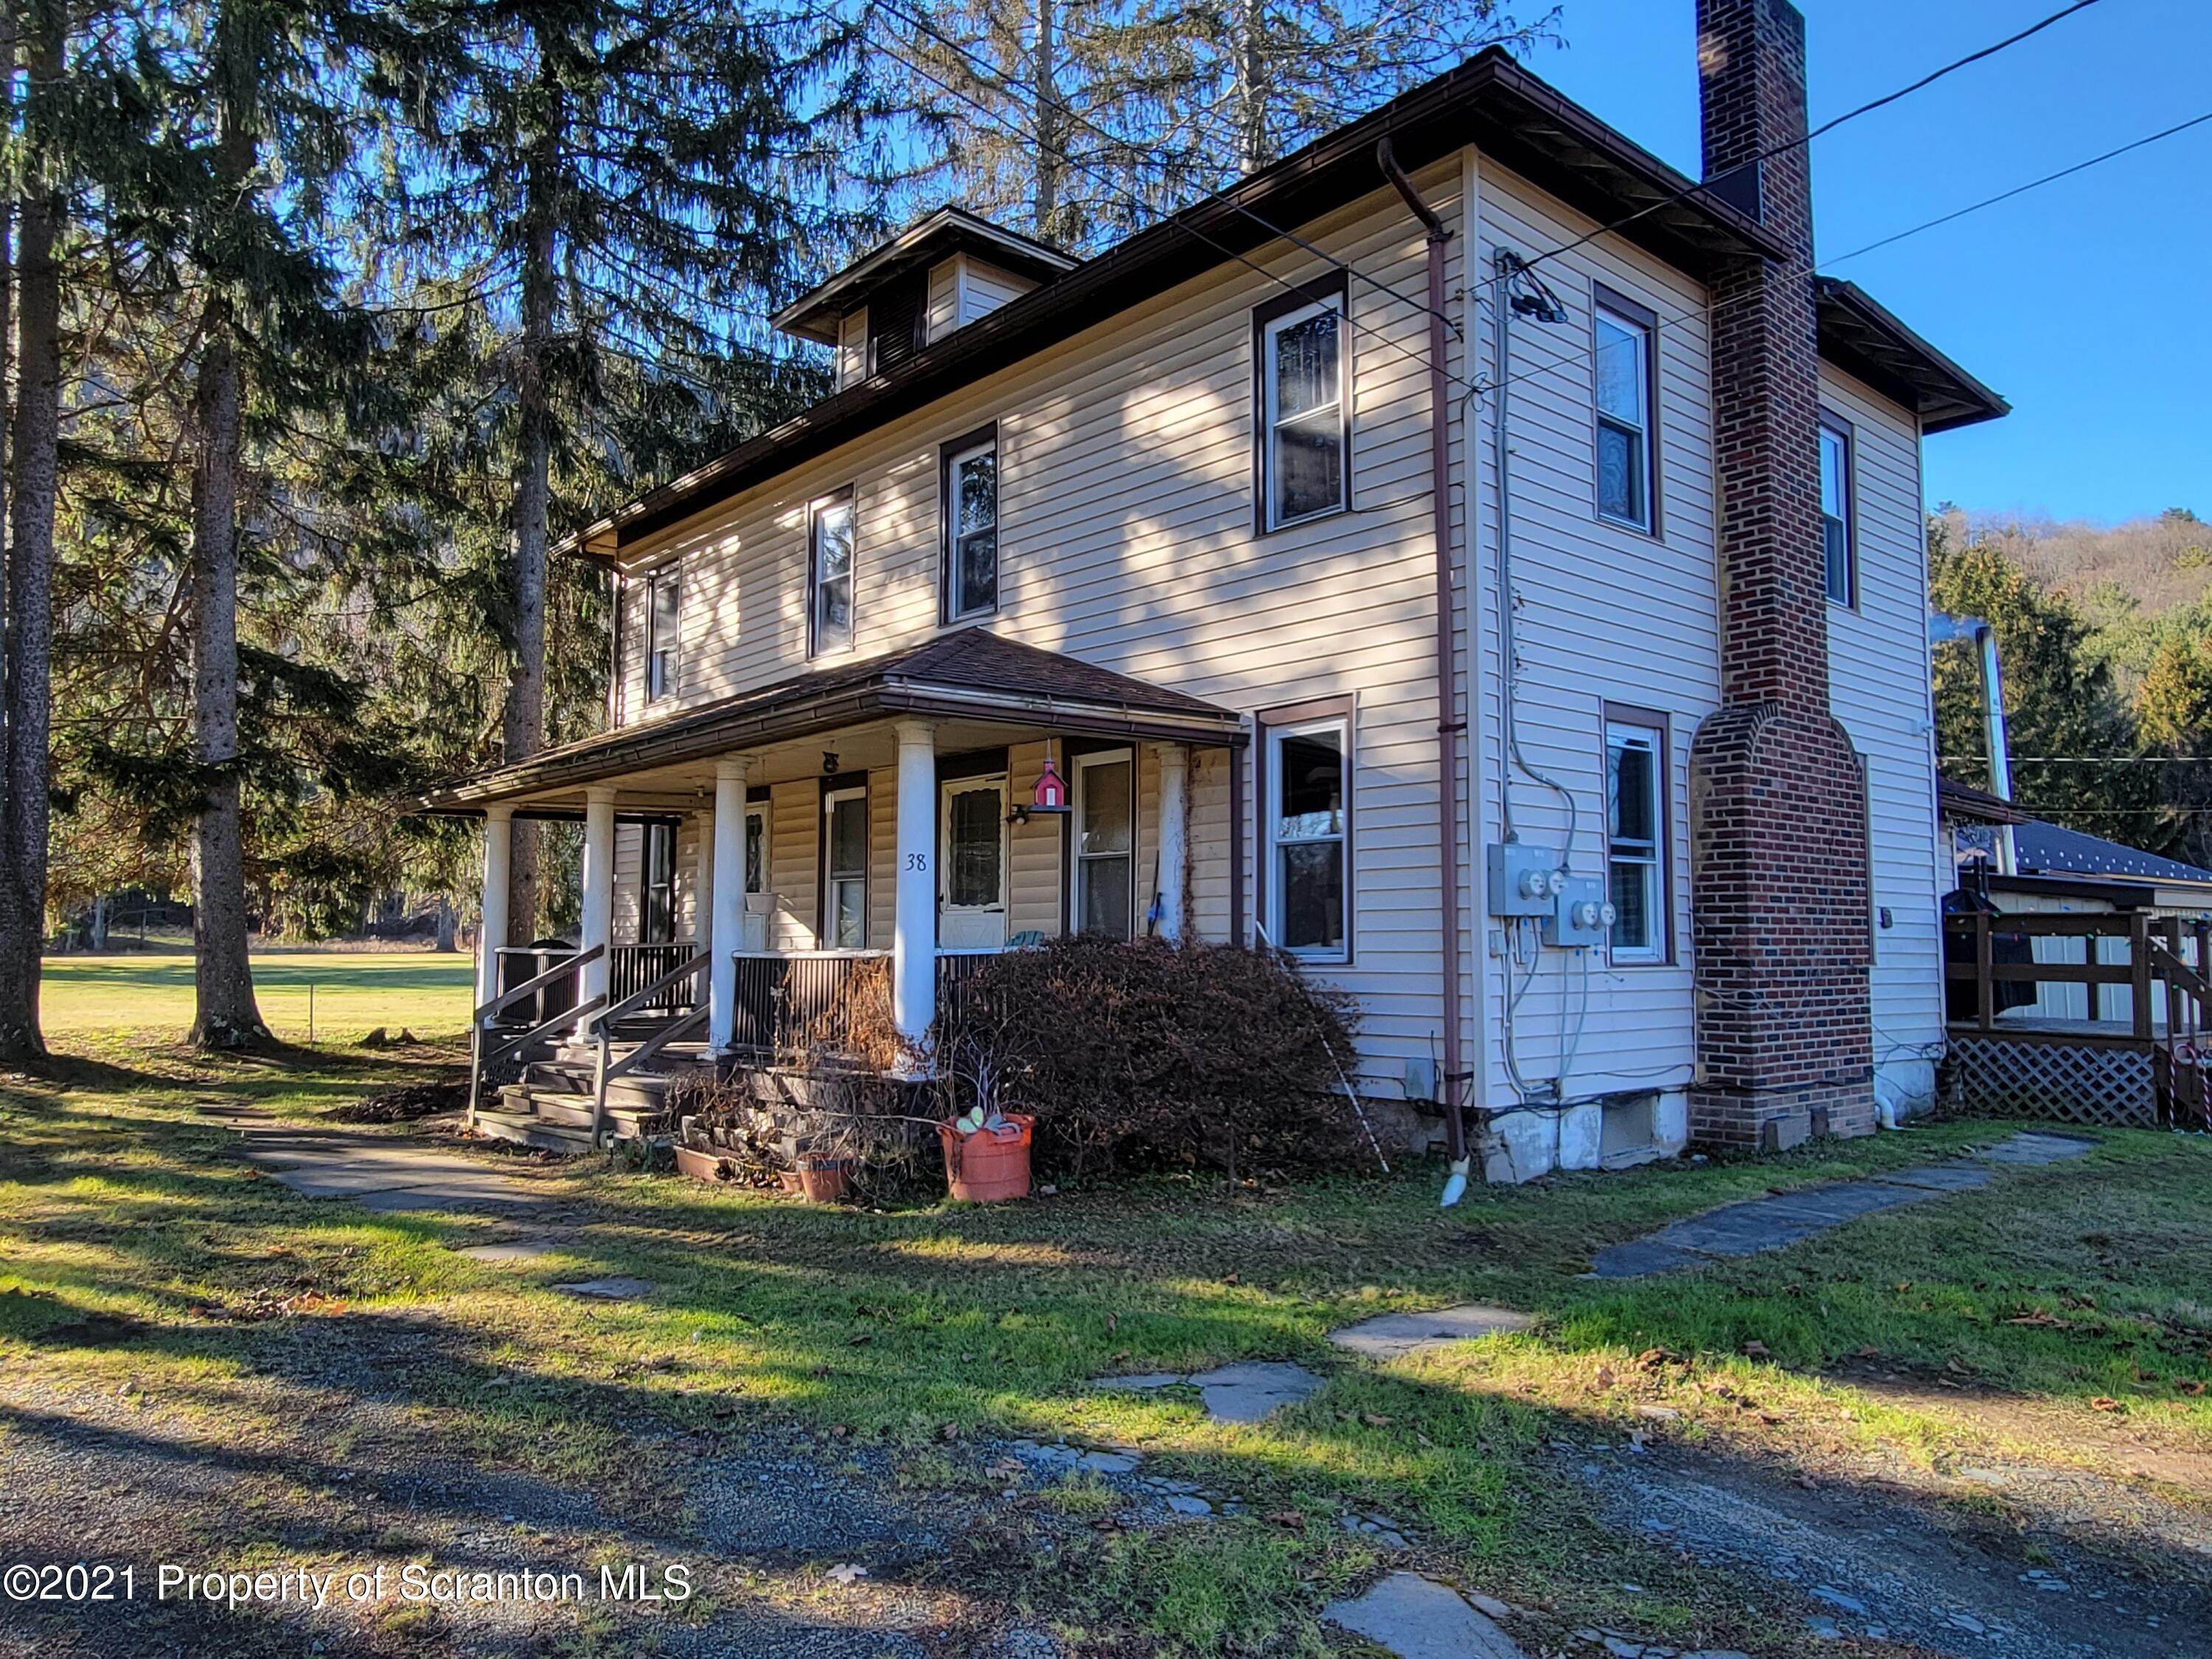 Commercial for Sale at 38 Sparrow Lane Hallstead, Pennsylvania 18822 United States